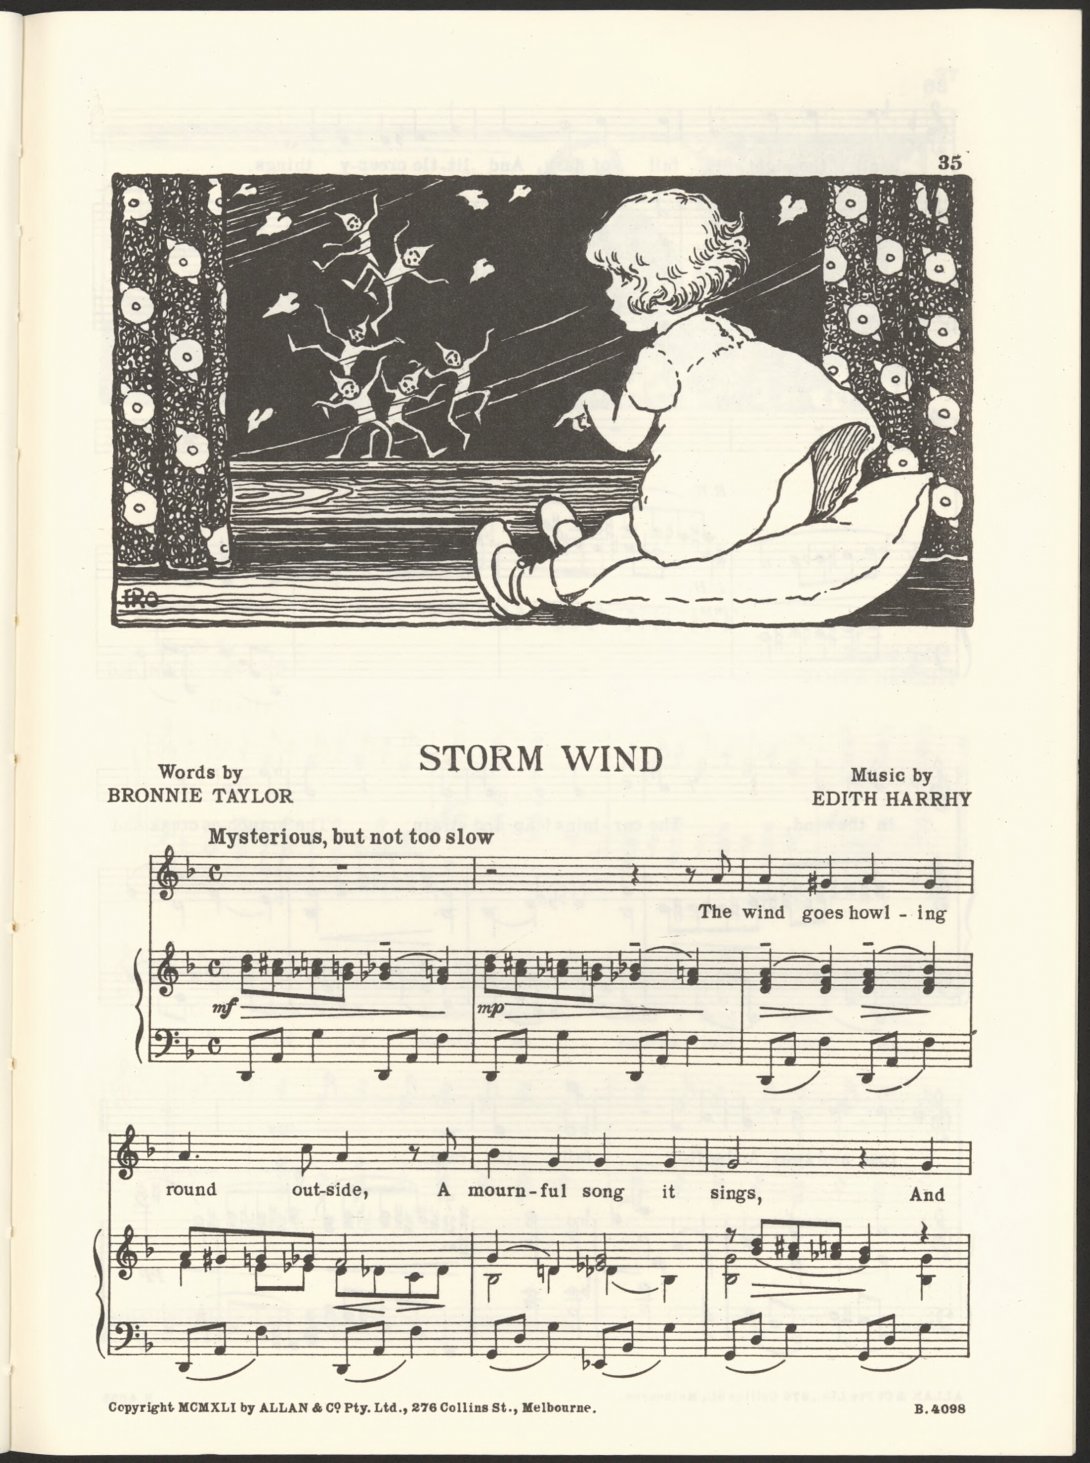 Sheet music featuring an illustration of a child looking out an open window